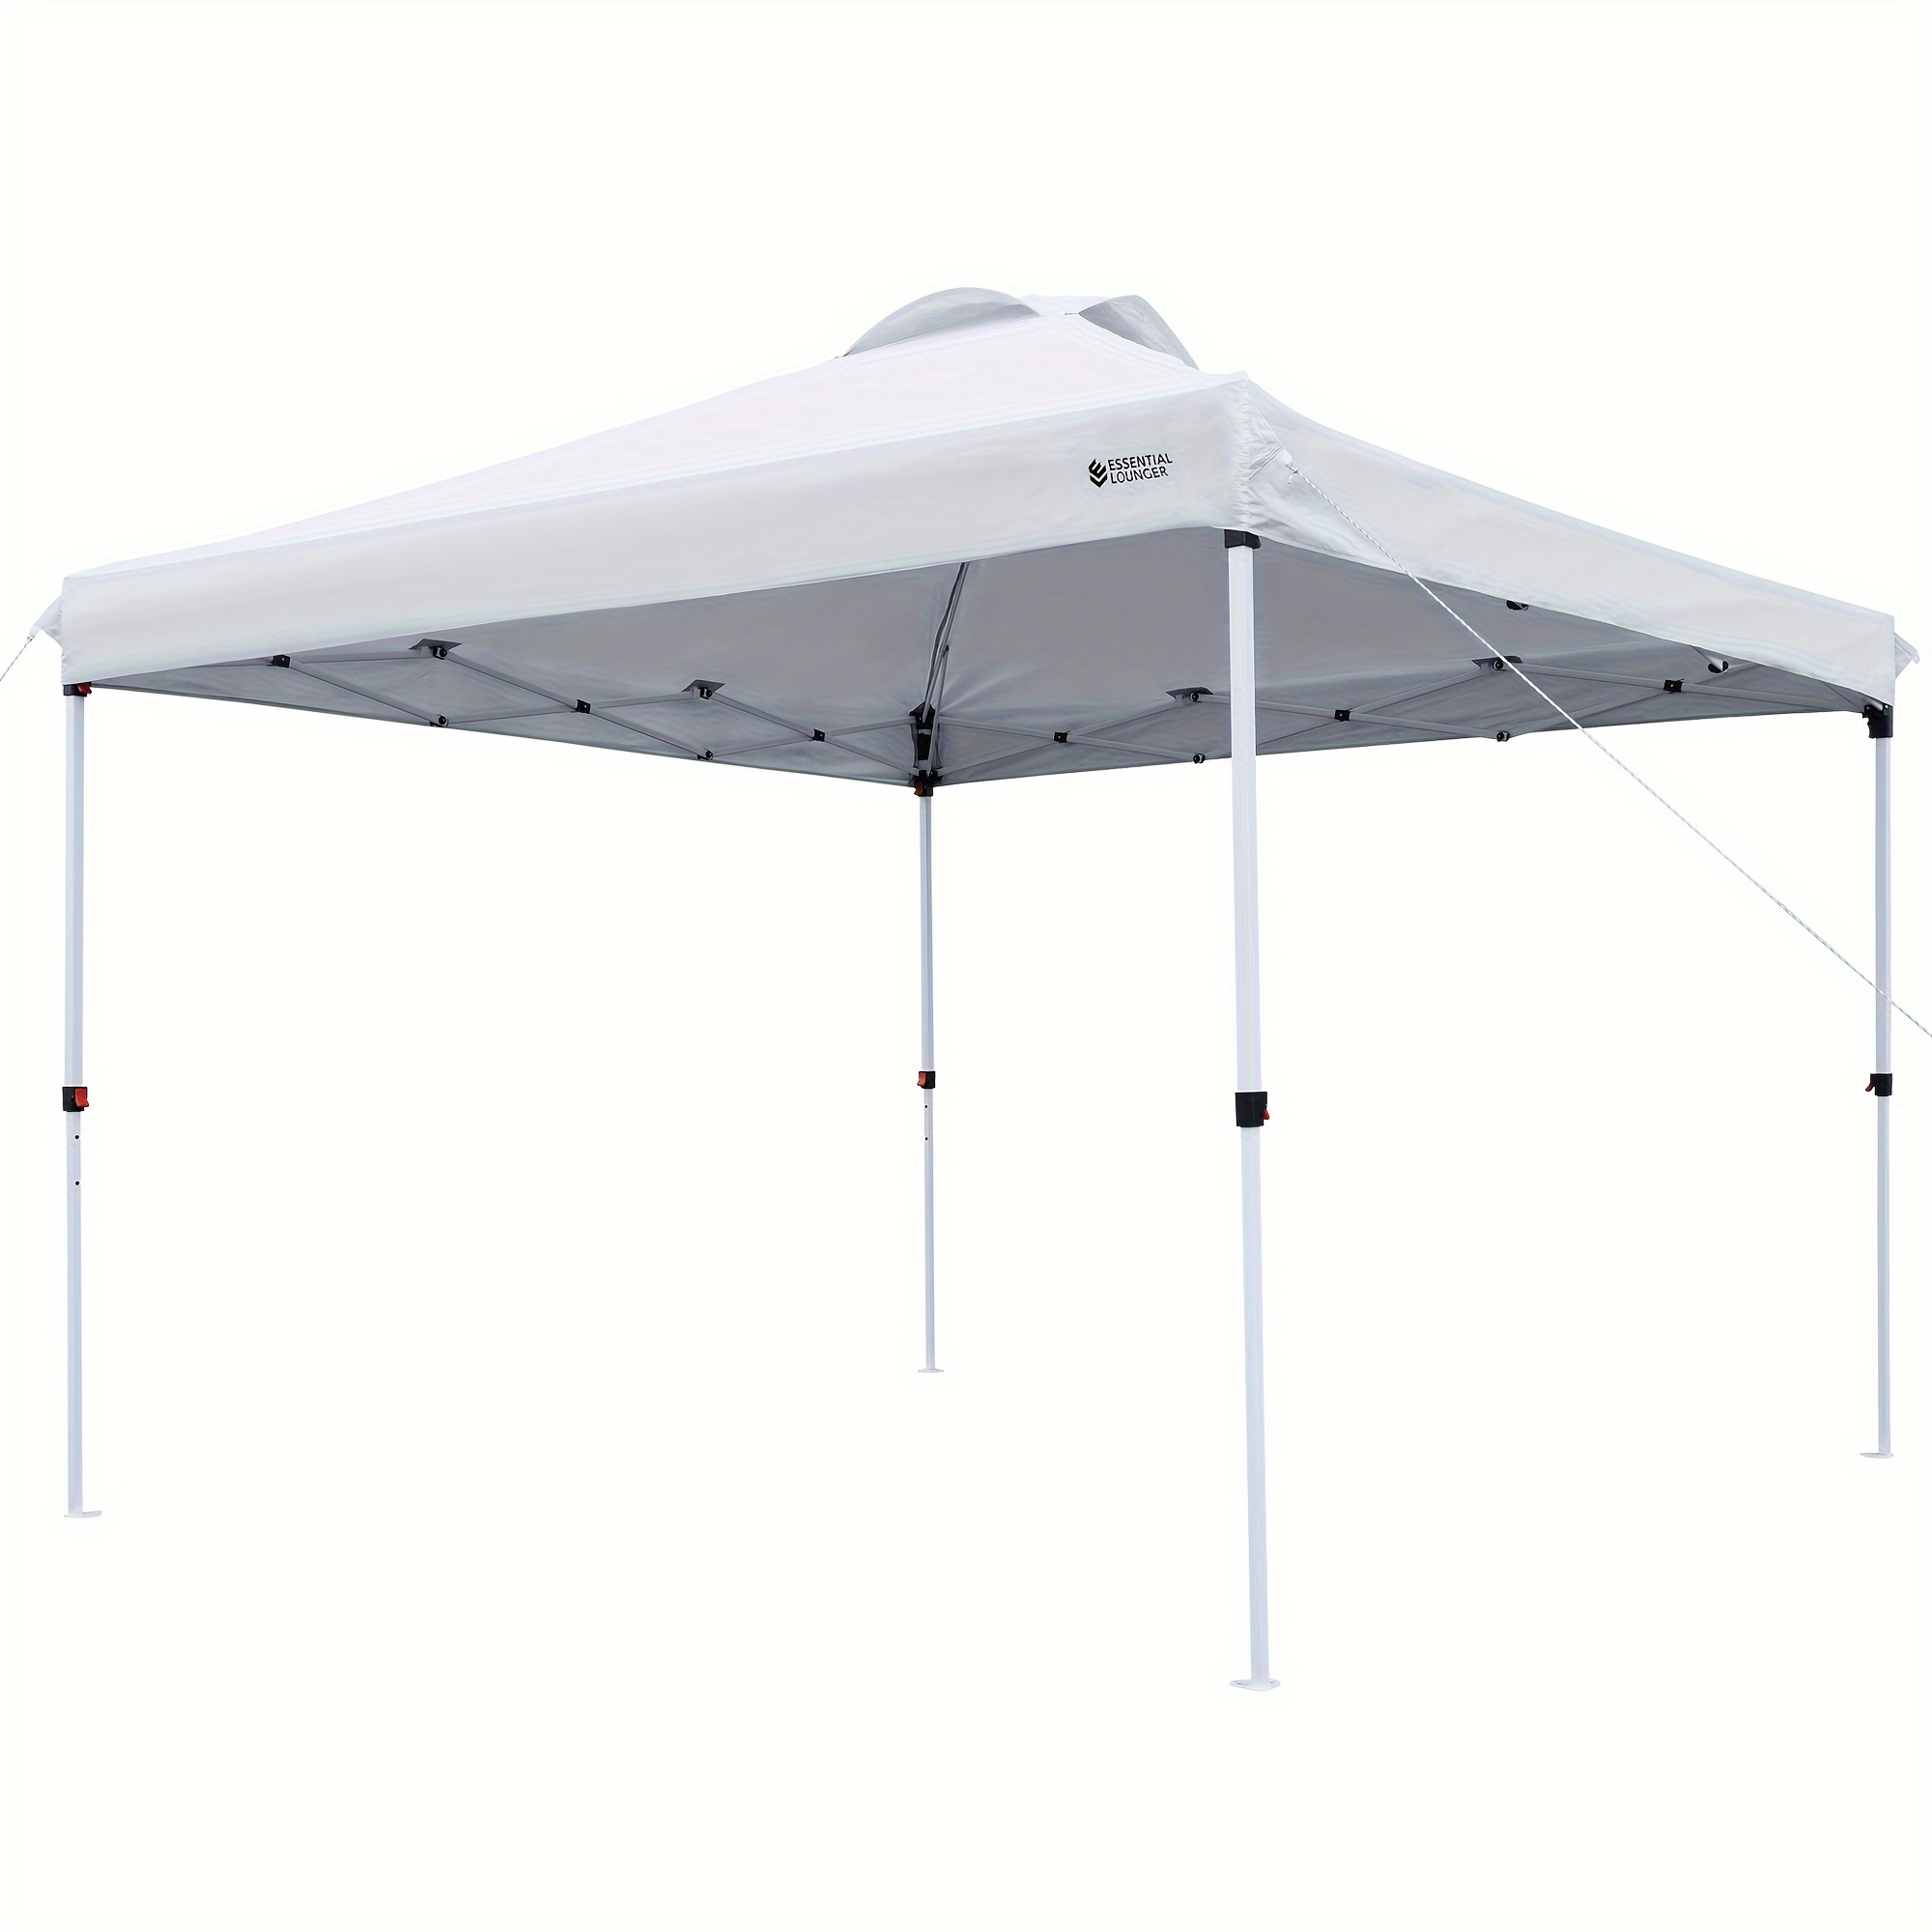 

10'x10' Pop Up Canopy, Portable Folding Instant Canopy Tent With Roller Bag, 4 Sand Bags, Outdoor Canopies, Quick Easy Setup Canopy, White